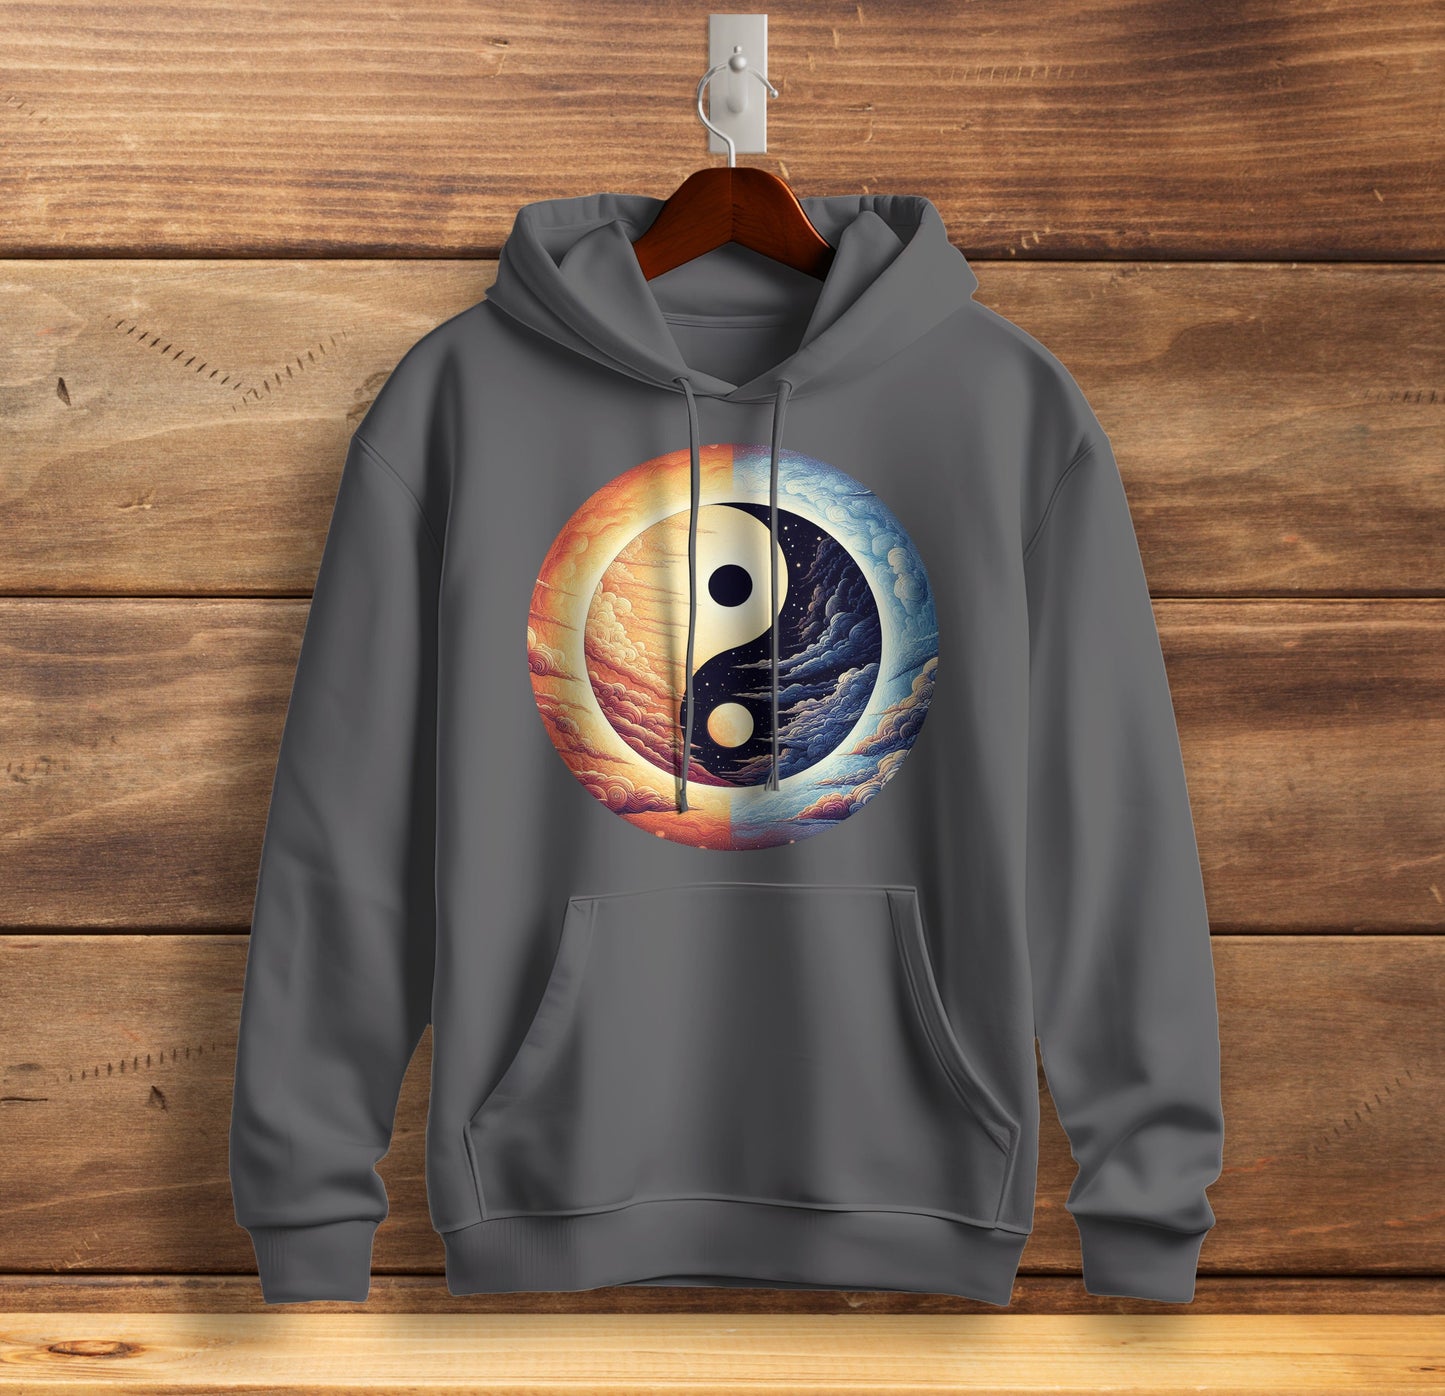 The Yin & The Yang - Graphic Printed Hooded Sweat Shirt for Men - Cotton - Cosmos Sweat Shirt 🪐 ☀️ ☯️ 🌘🌑🌒